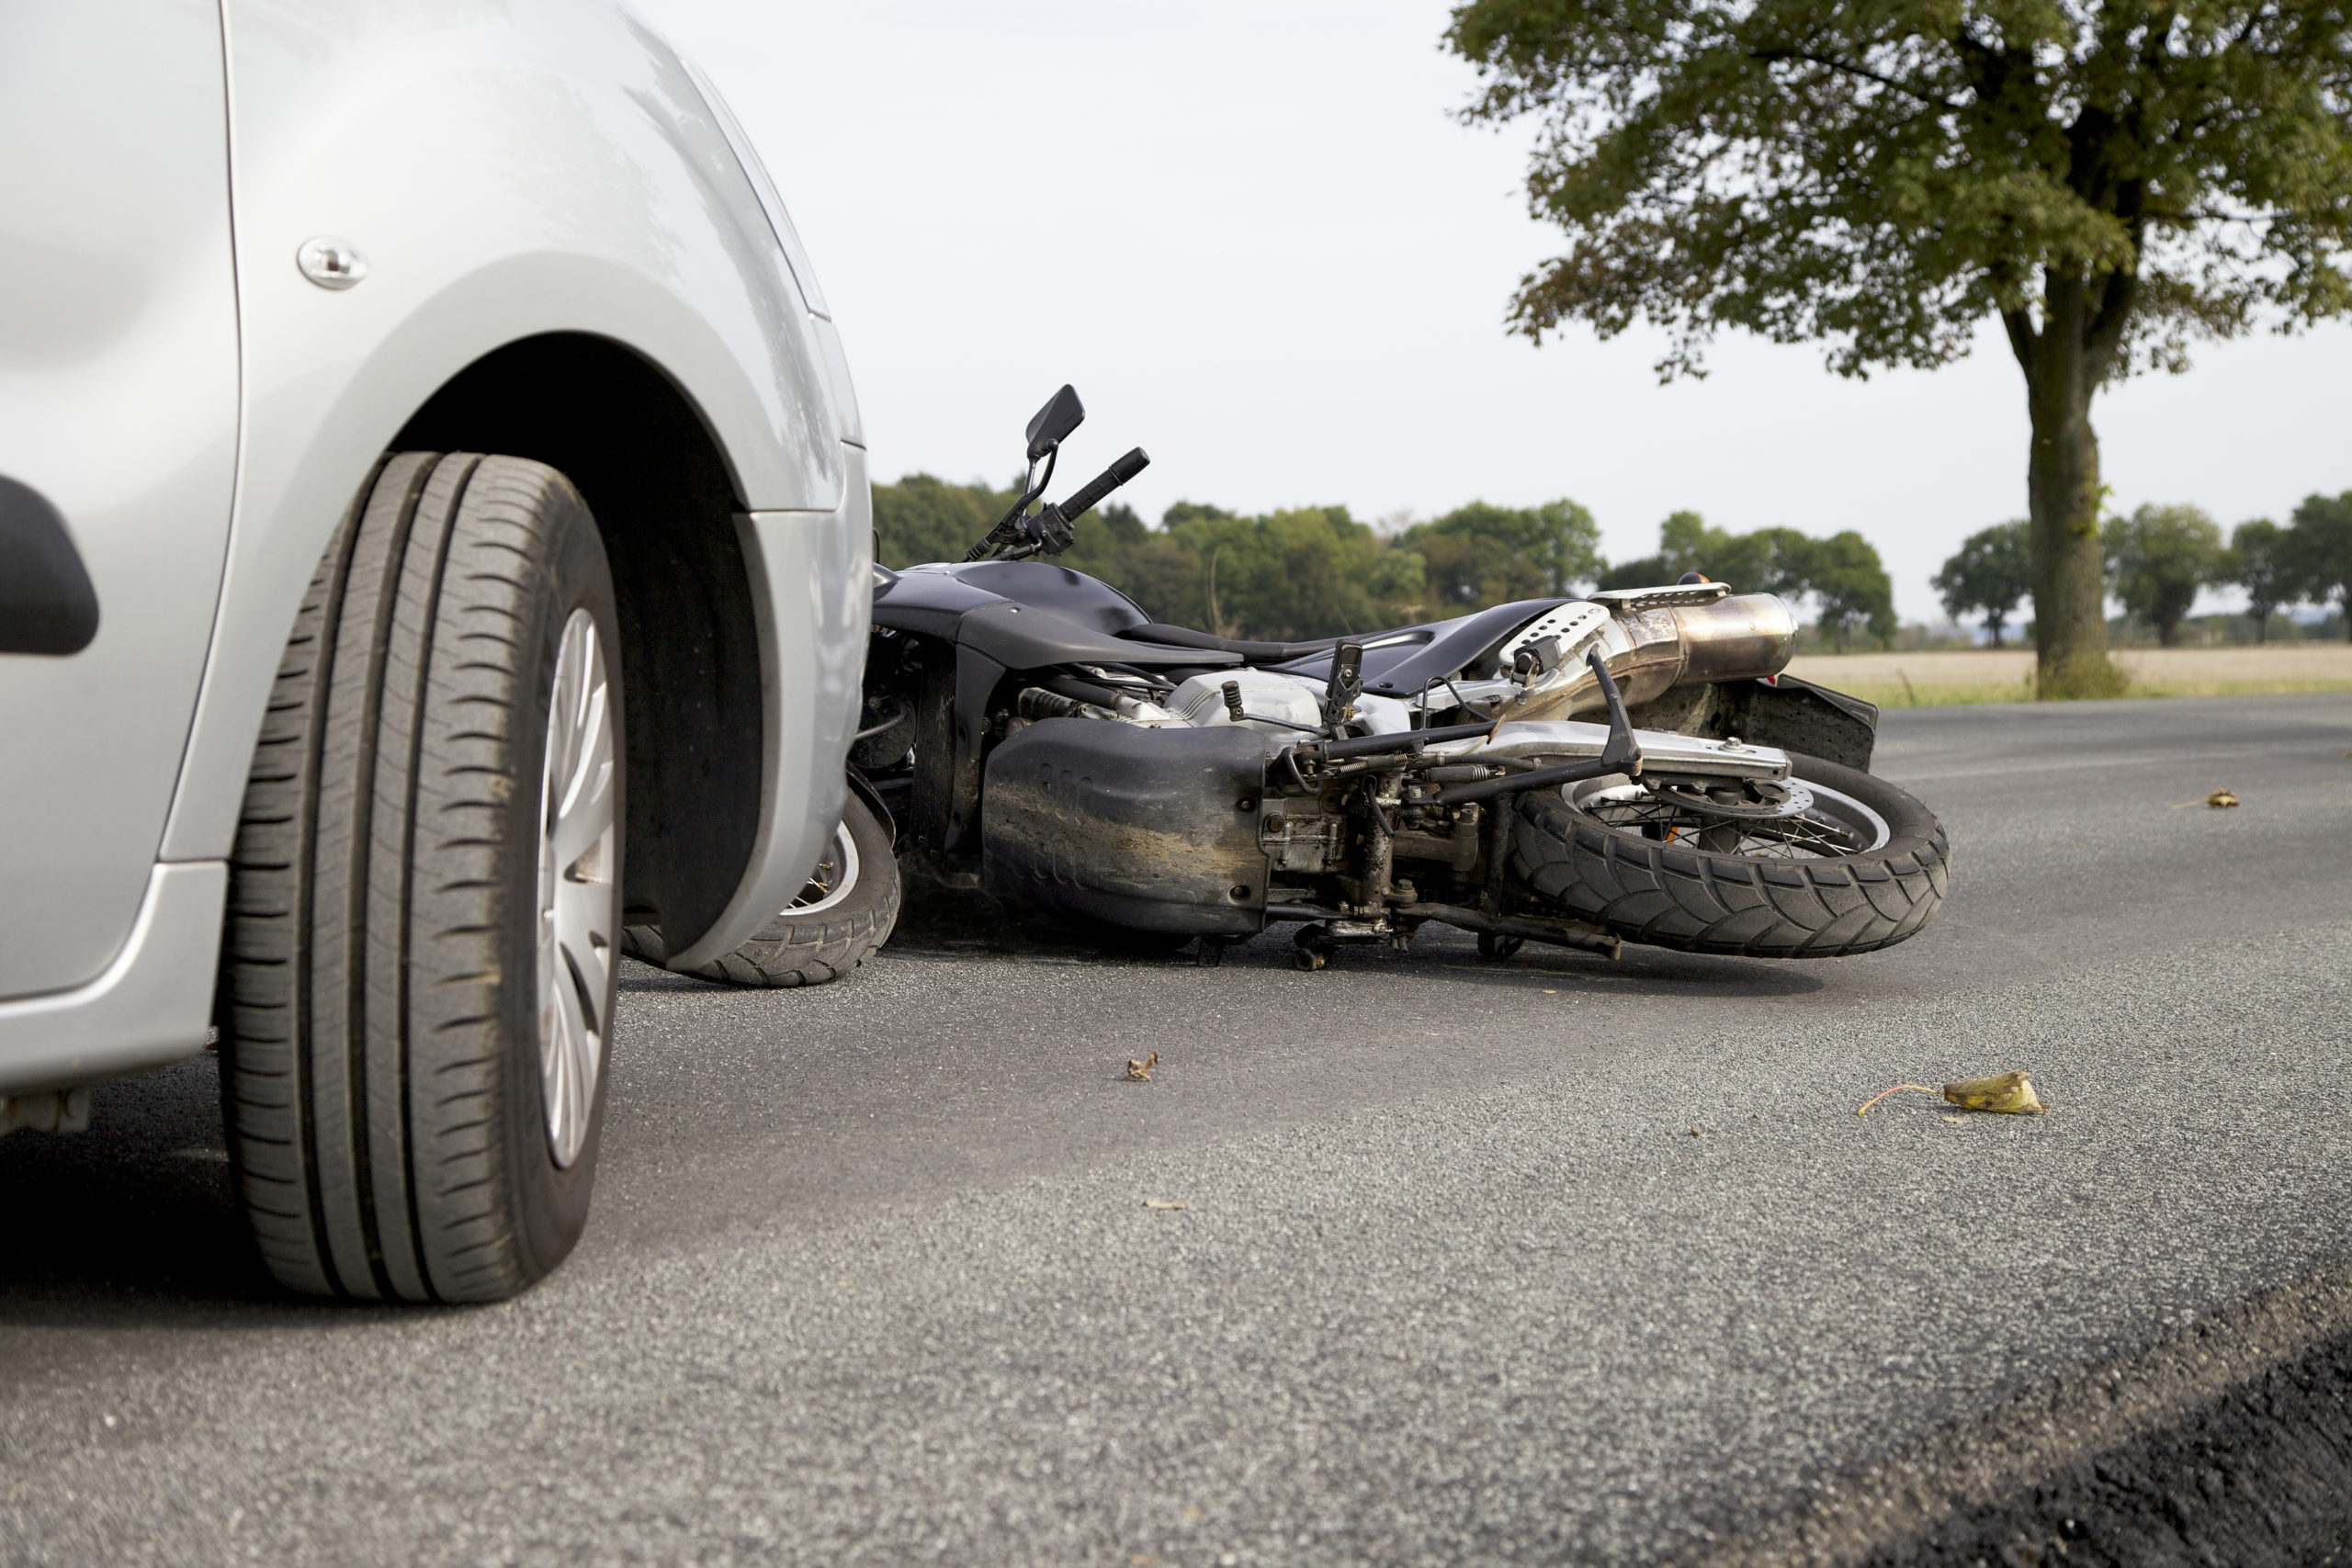 What Should I Do After a Motorcycle Accident?